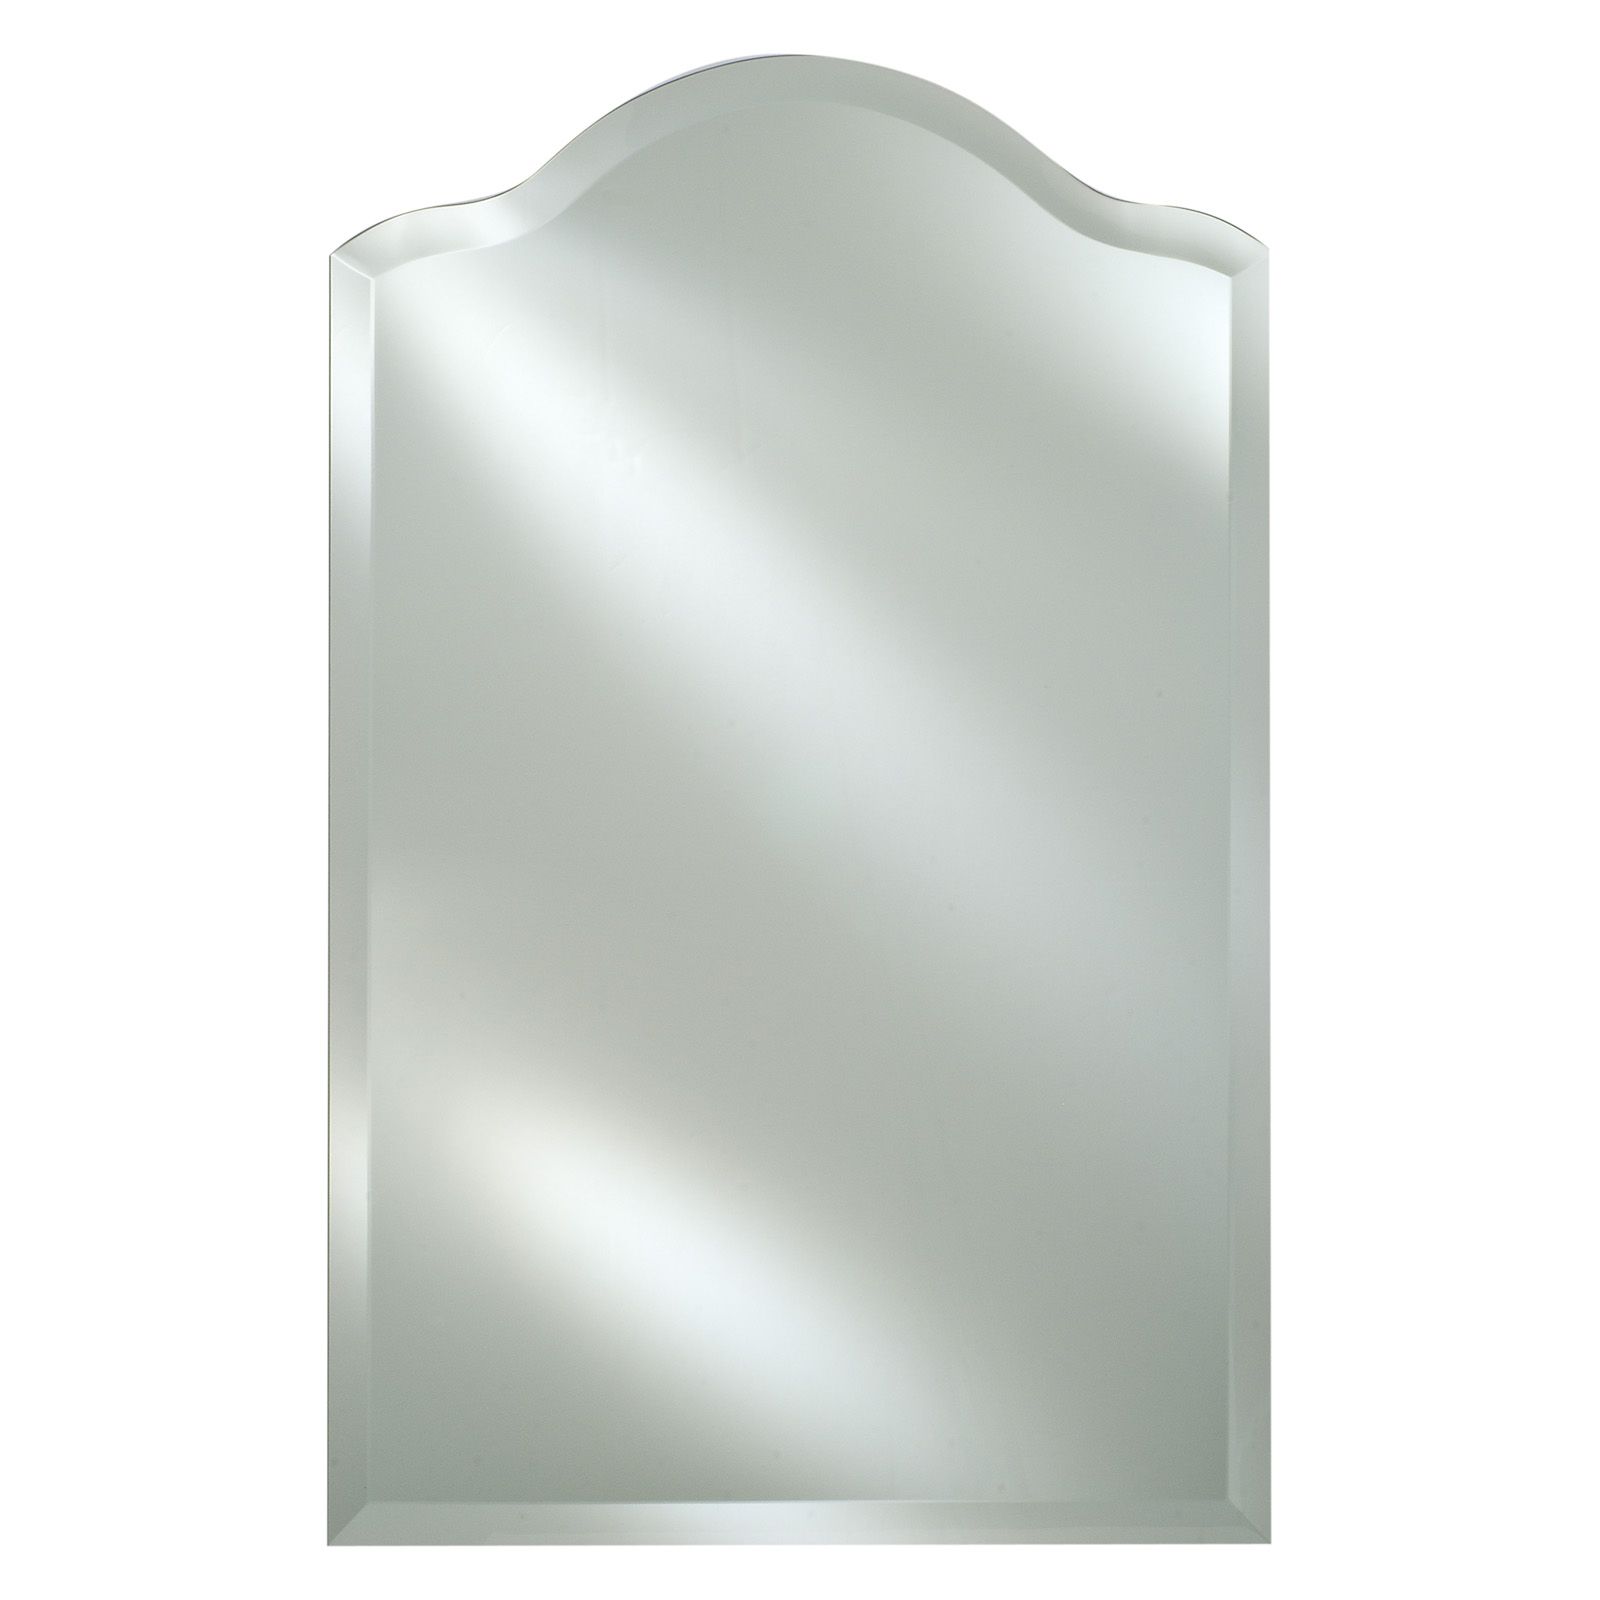 Radiance Frameless Decorative Arch Vanity / Wall Mirror – Mirrors At With Regard To Crown Arch Frameless Beveled Wall Mirrors (View 7 of 15)